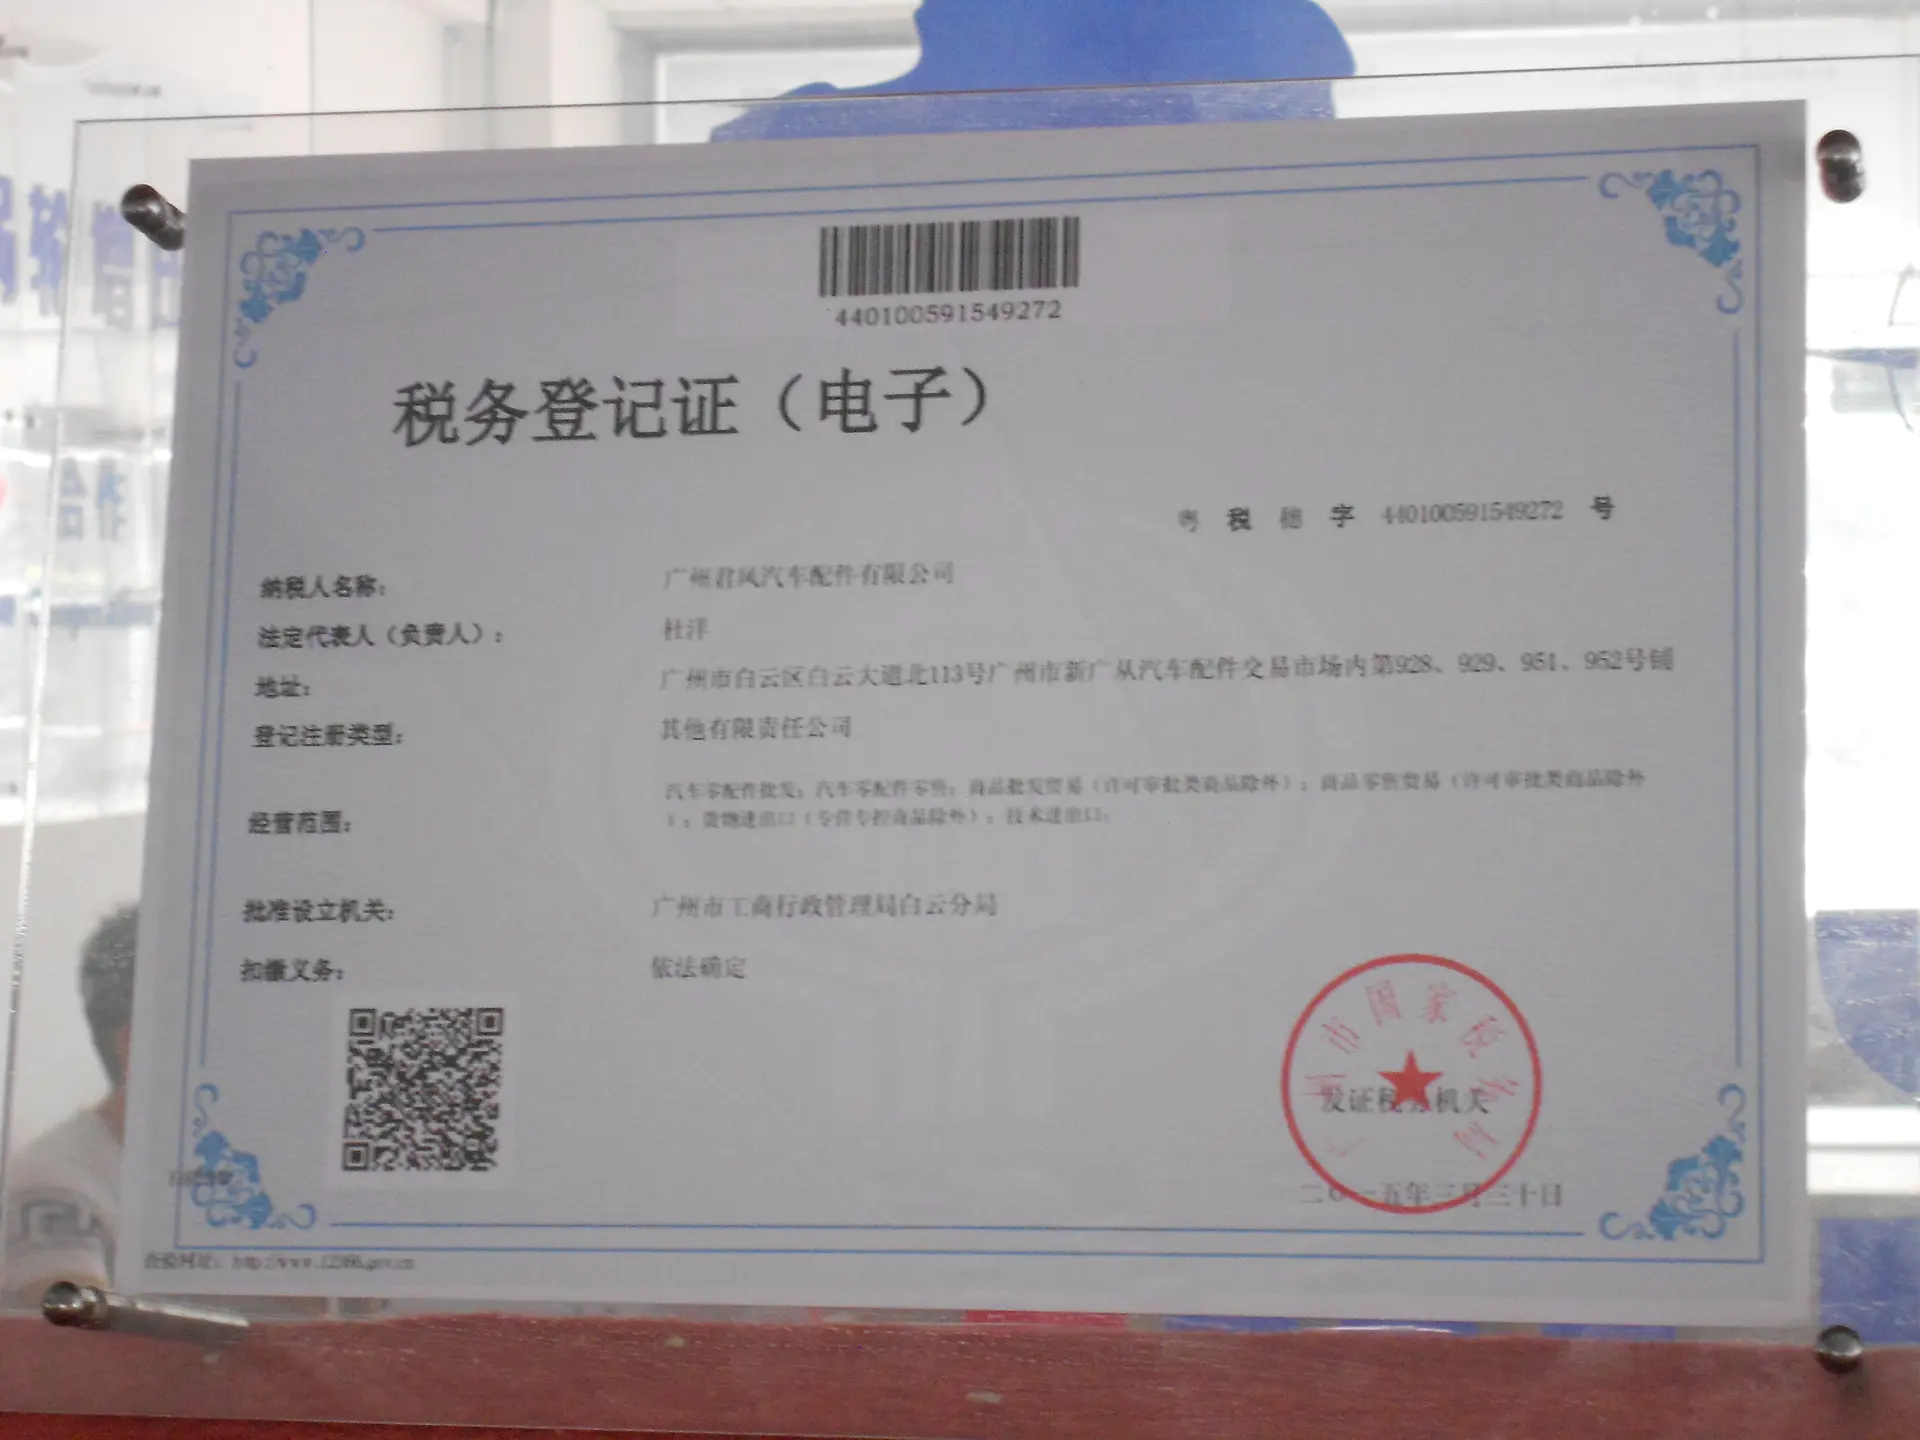 Junfeng turbo certificate3